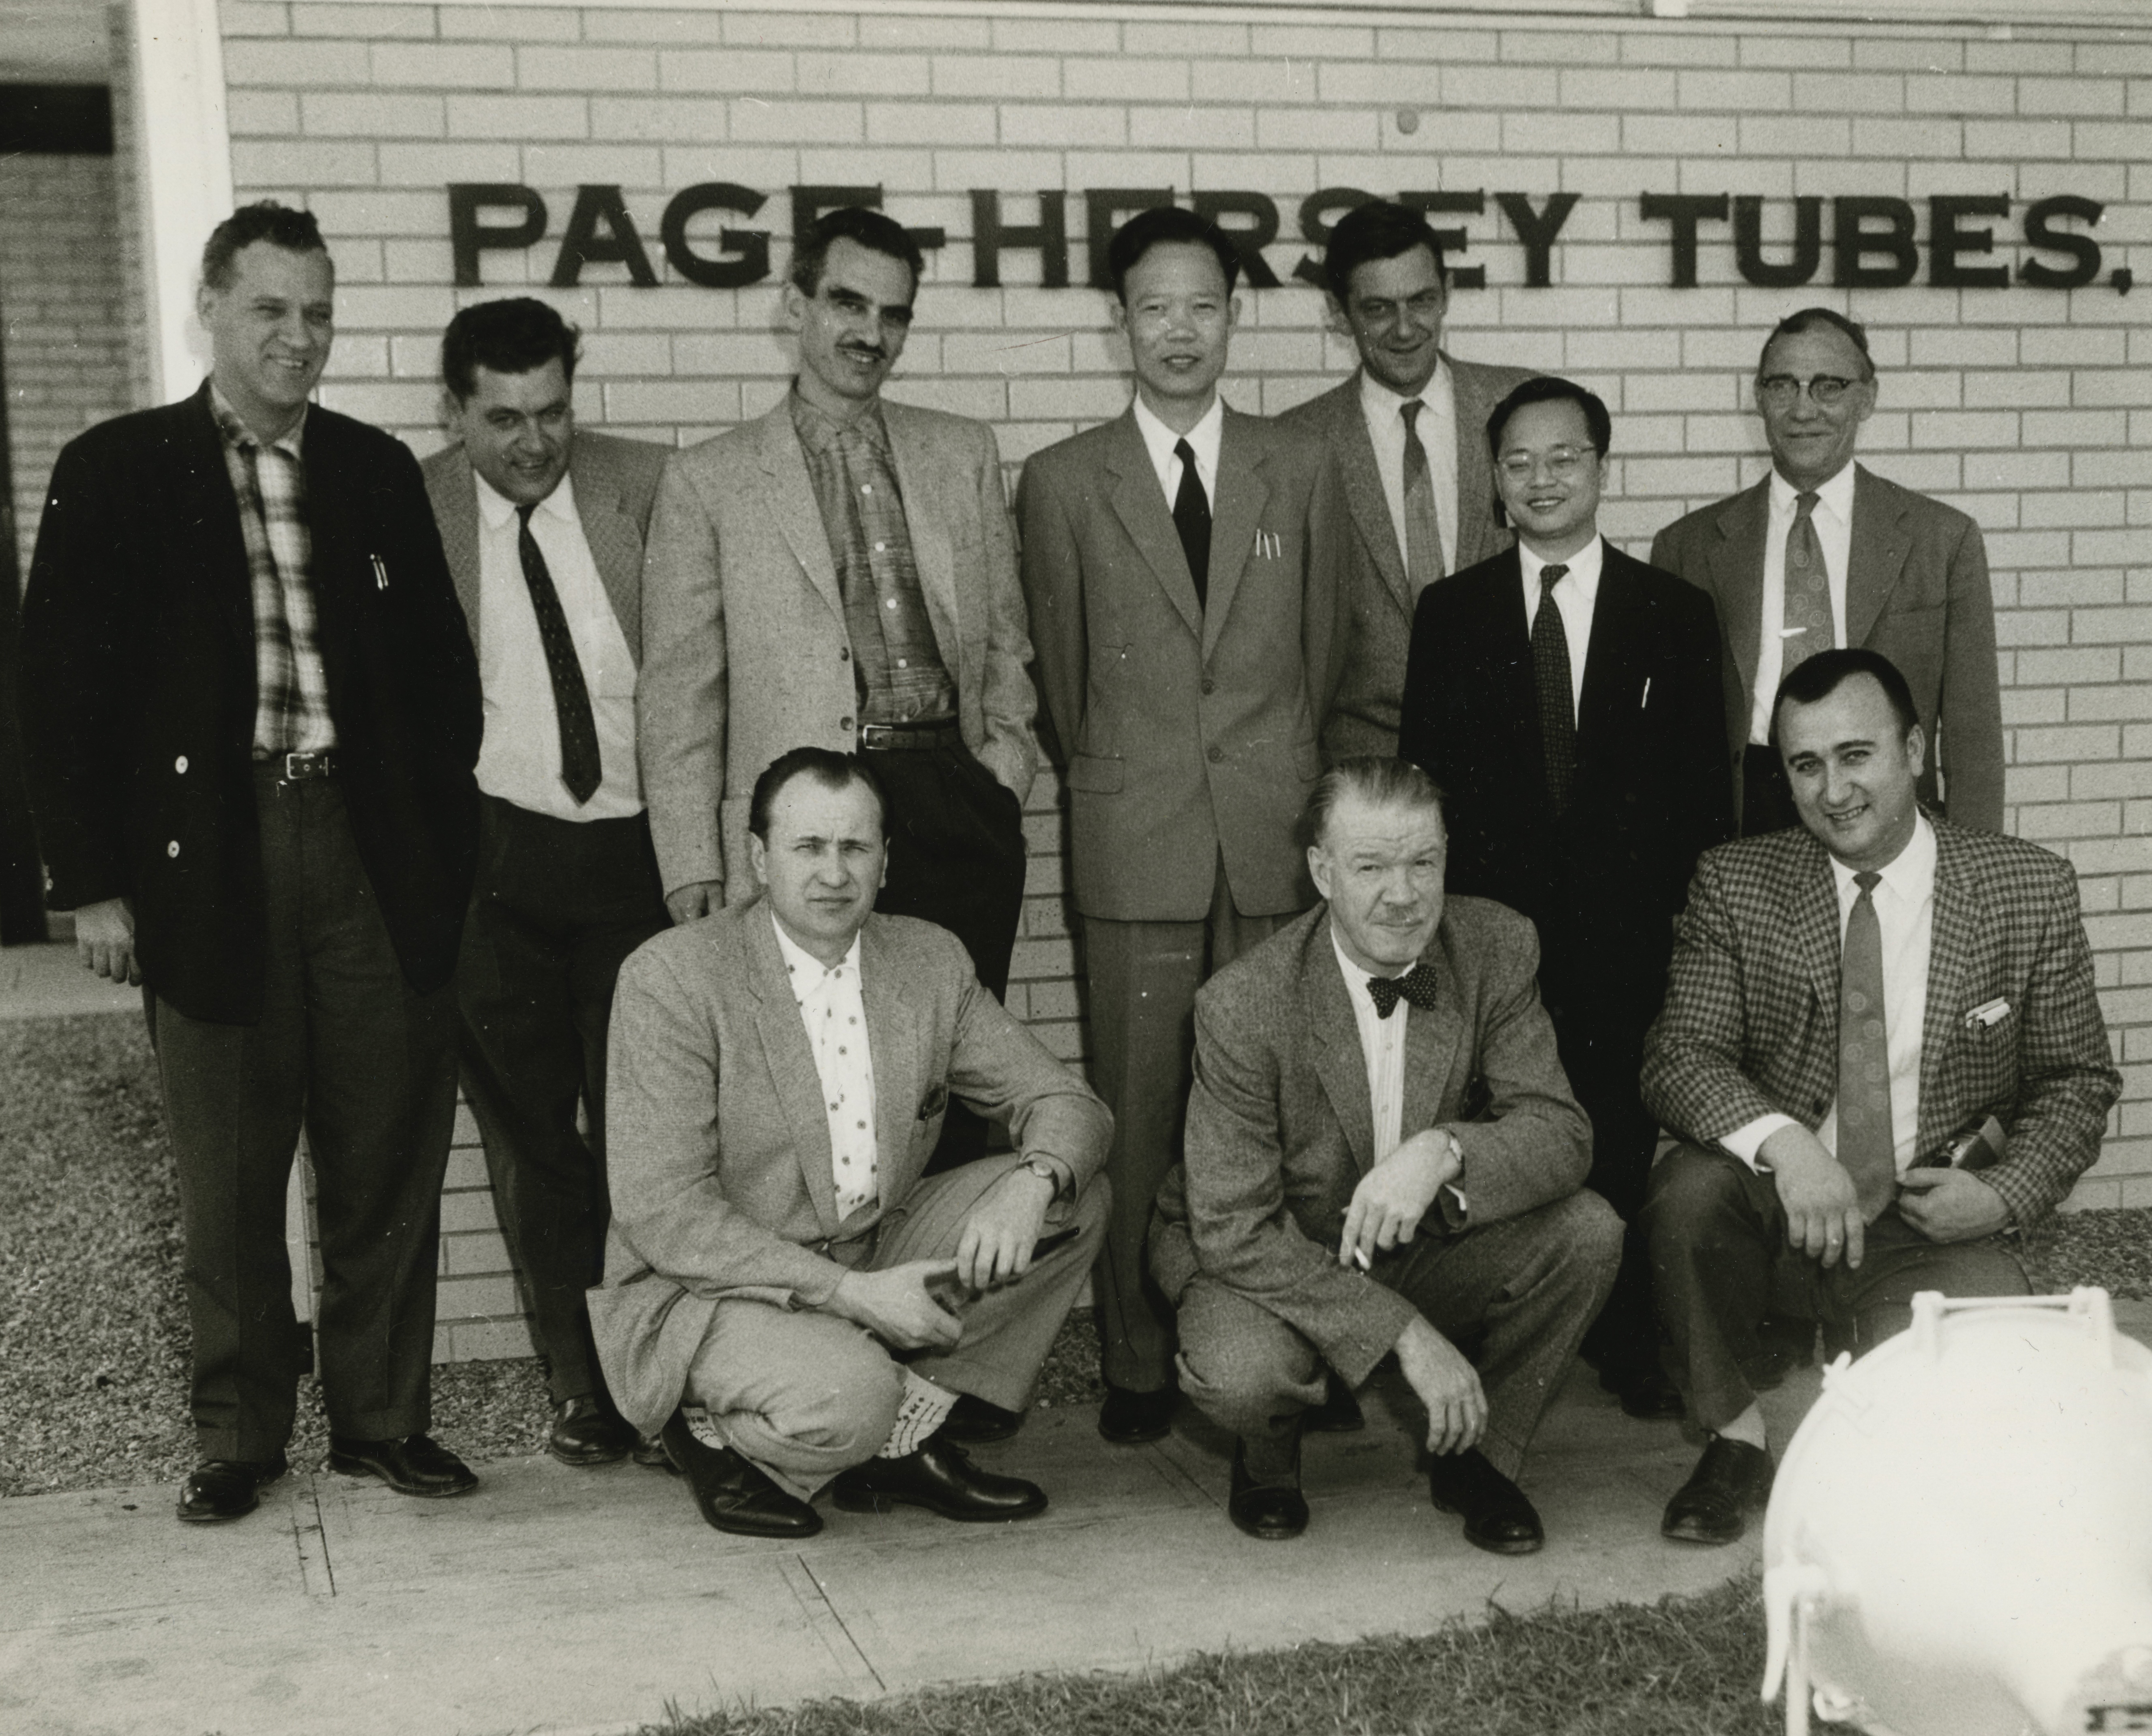 Two rows of men in suits pose in front of a brick wall that reads PAGE-HERSEY TUBES.